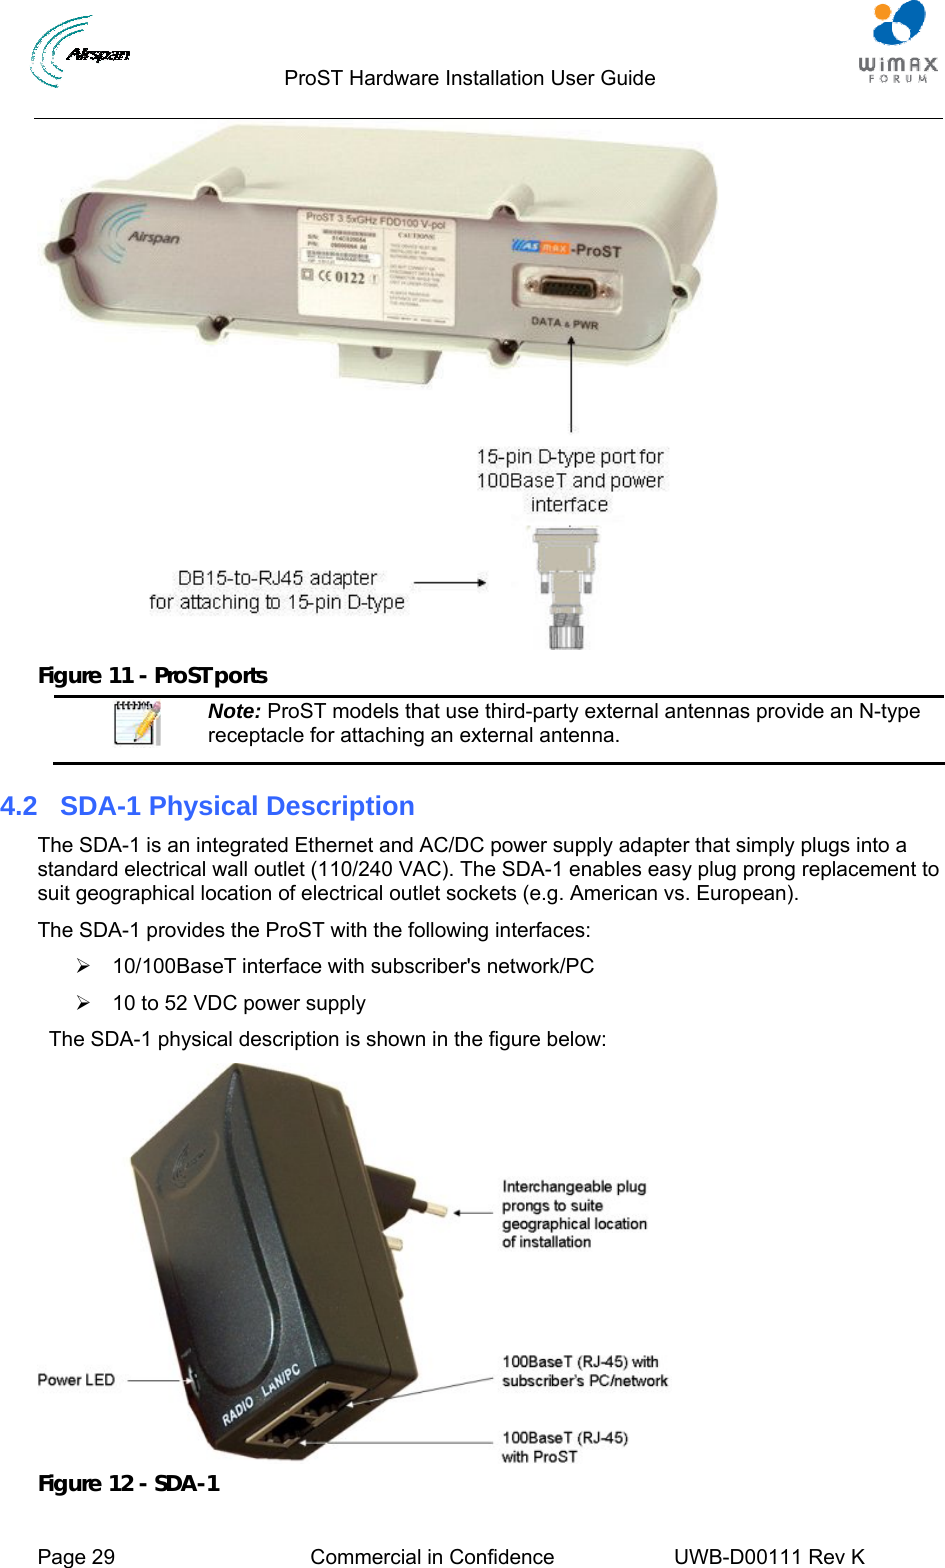                                  ProST Hardware Installation User Guide     Page 29  Commercial in Confidence  UWB-D00111 Rev K    Figure 11 - ProST ports  Note: ProST models that use third-party external antennas provide an N-type receptacle for attaching an external antenna. 4.2  SDA-1 Physical Description The SDA-1 is an integrated Ethernet and AC/DC power supply adapter that simply plugs into a standard electrical wall outlet (110/240 VAC). The SDA-1 enables easy plug prong replacement to suit geographical location of electrical outlet sockets (e.g. American vs. European). The SDA-1 provides the ProST with the following interfaces: ¾  10/100BaseT interface with subscriber&apos;s network/PC ¾  10 to 52 VDC power supply   The SDA-1 physical description is shown in the figure below:  Figure 12 - SDA-1 